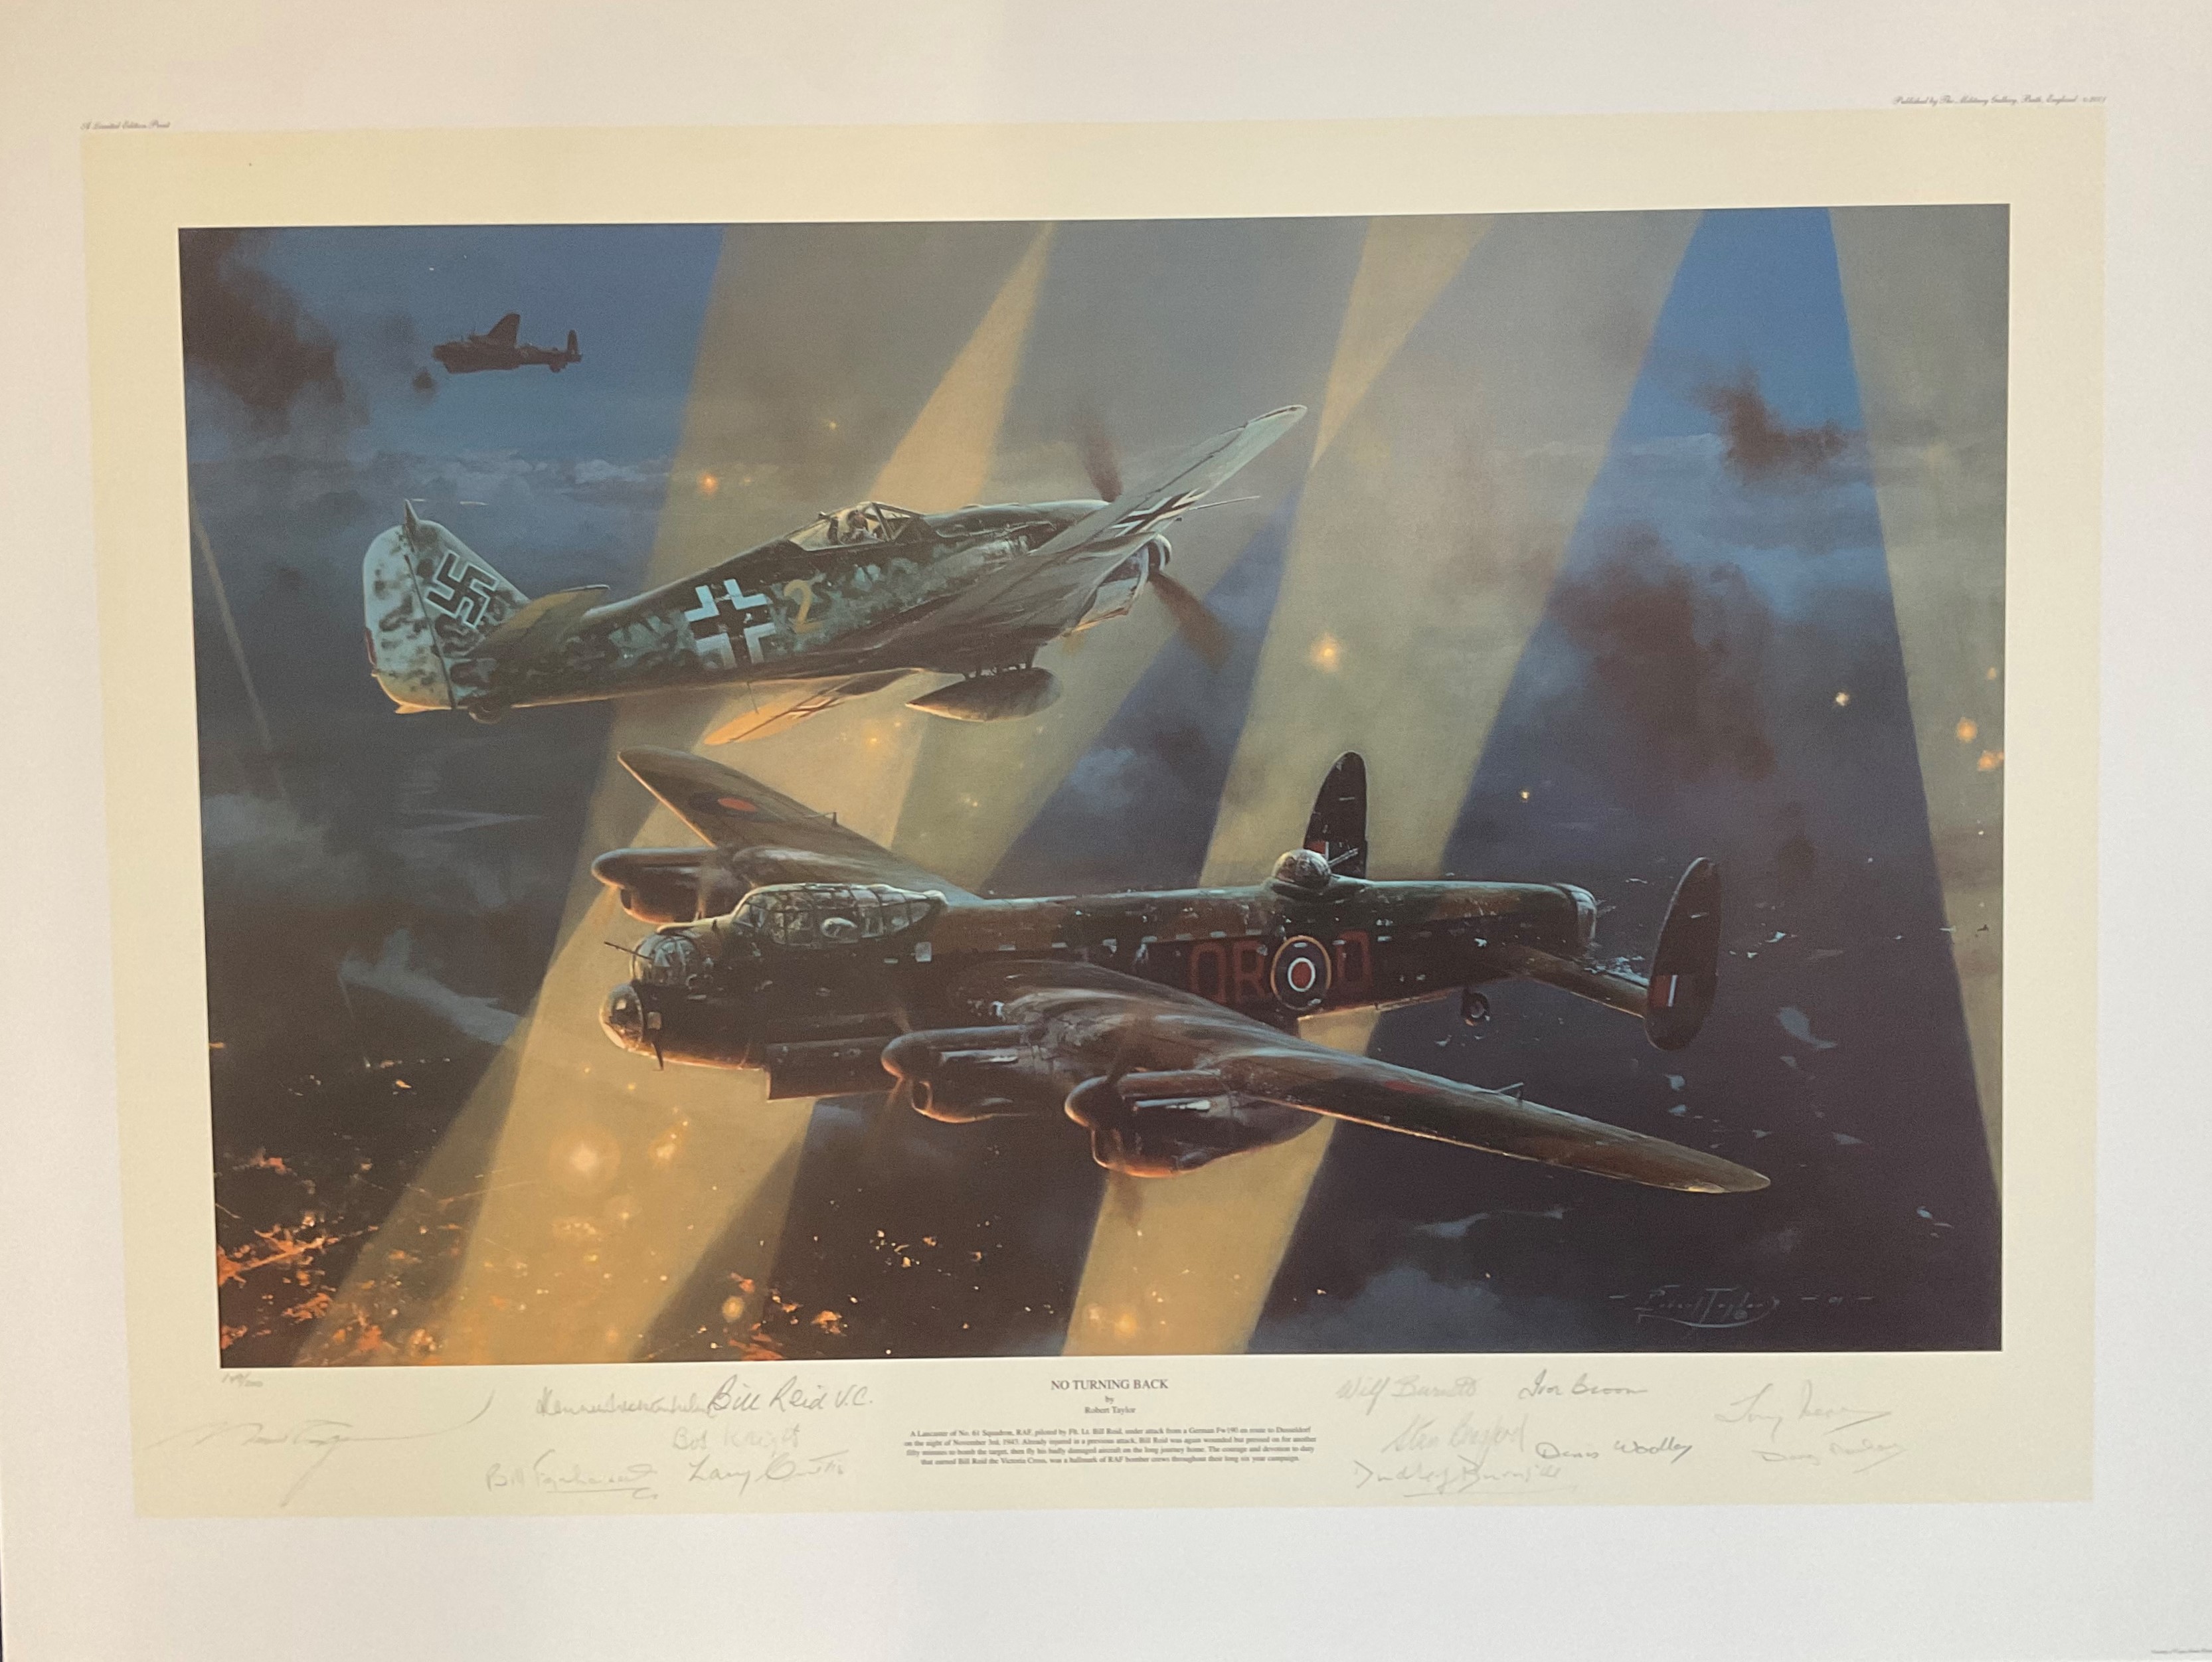 World War II 31x24 print titled No Turning Back limited edition 149/250 signed in pencil by the